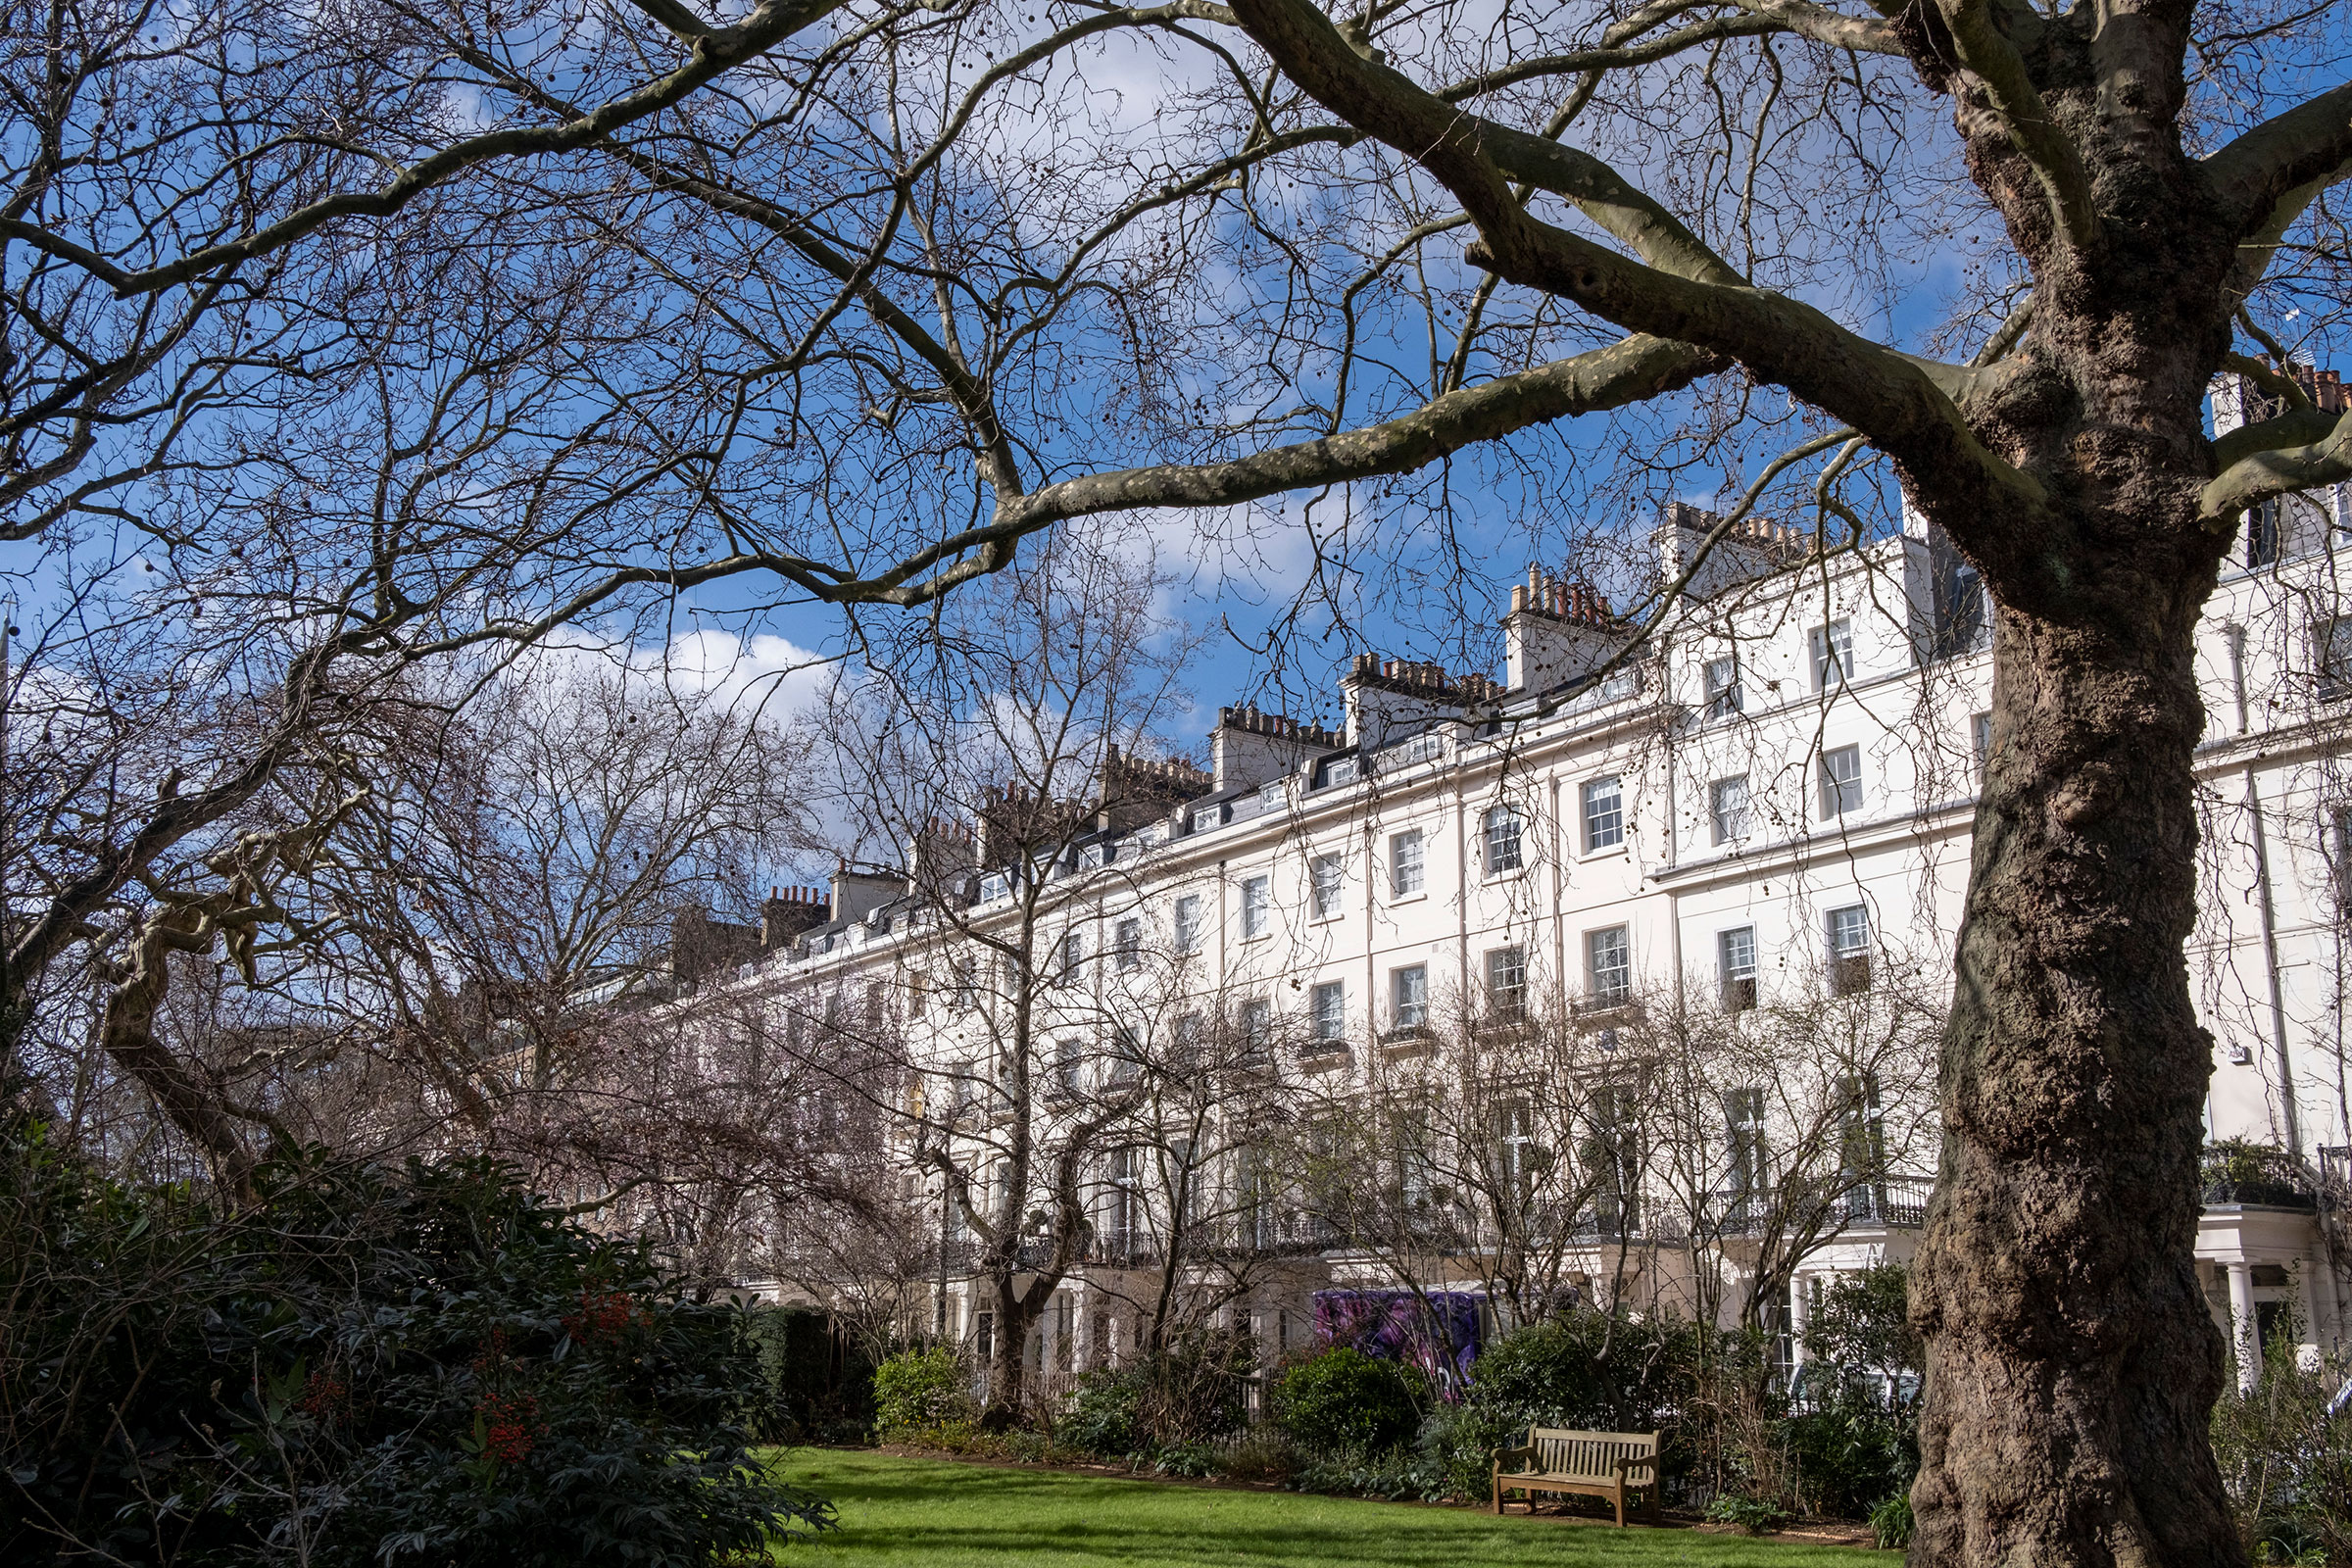 Luxury properties in Chester Square in London, where several Russian property owners are said to have invested, on Feb. 25 2022. (Richard Baker—In Pictures/Getty Images)